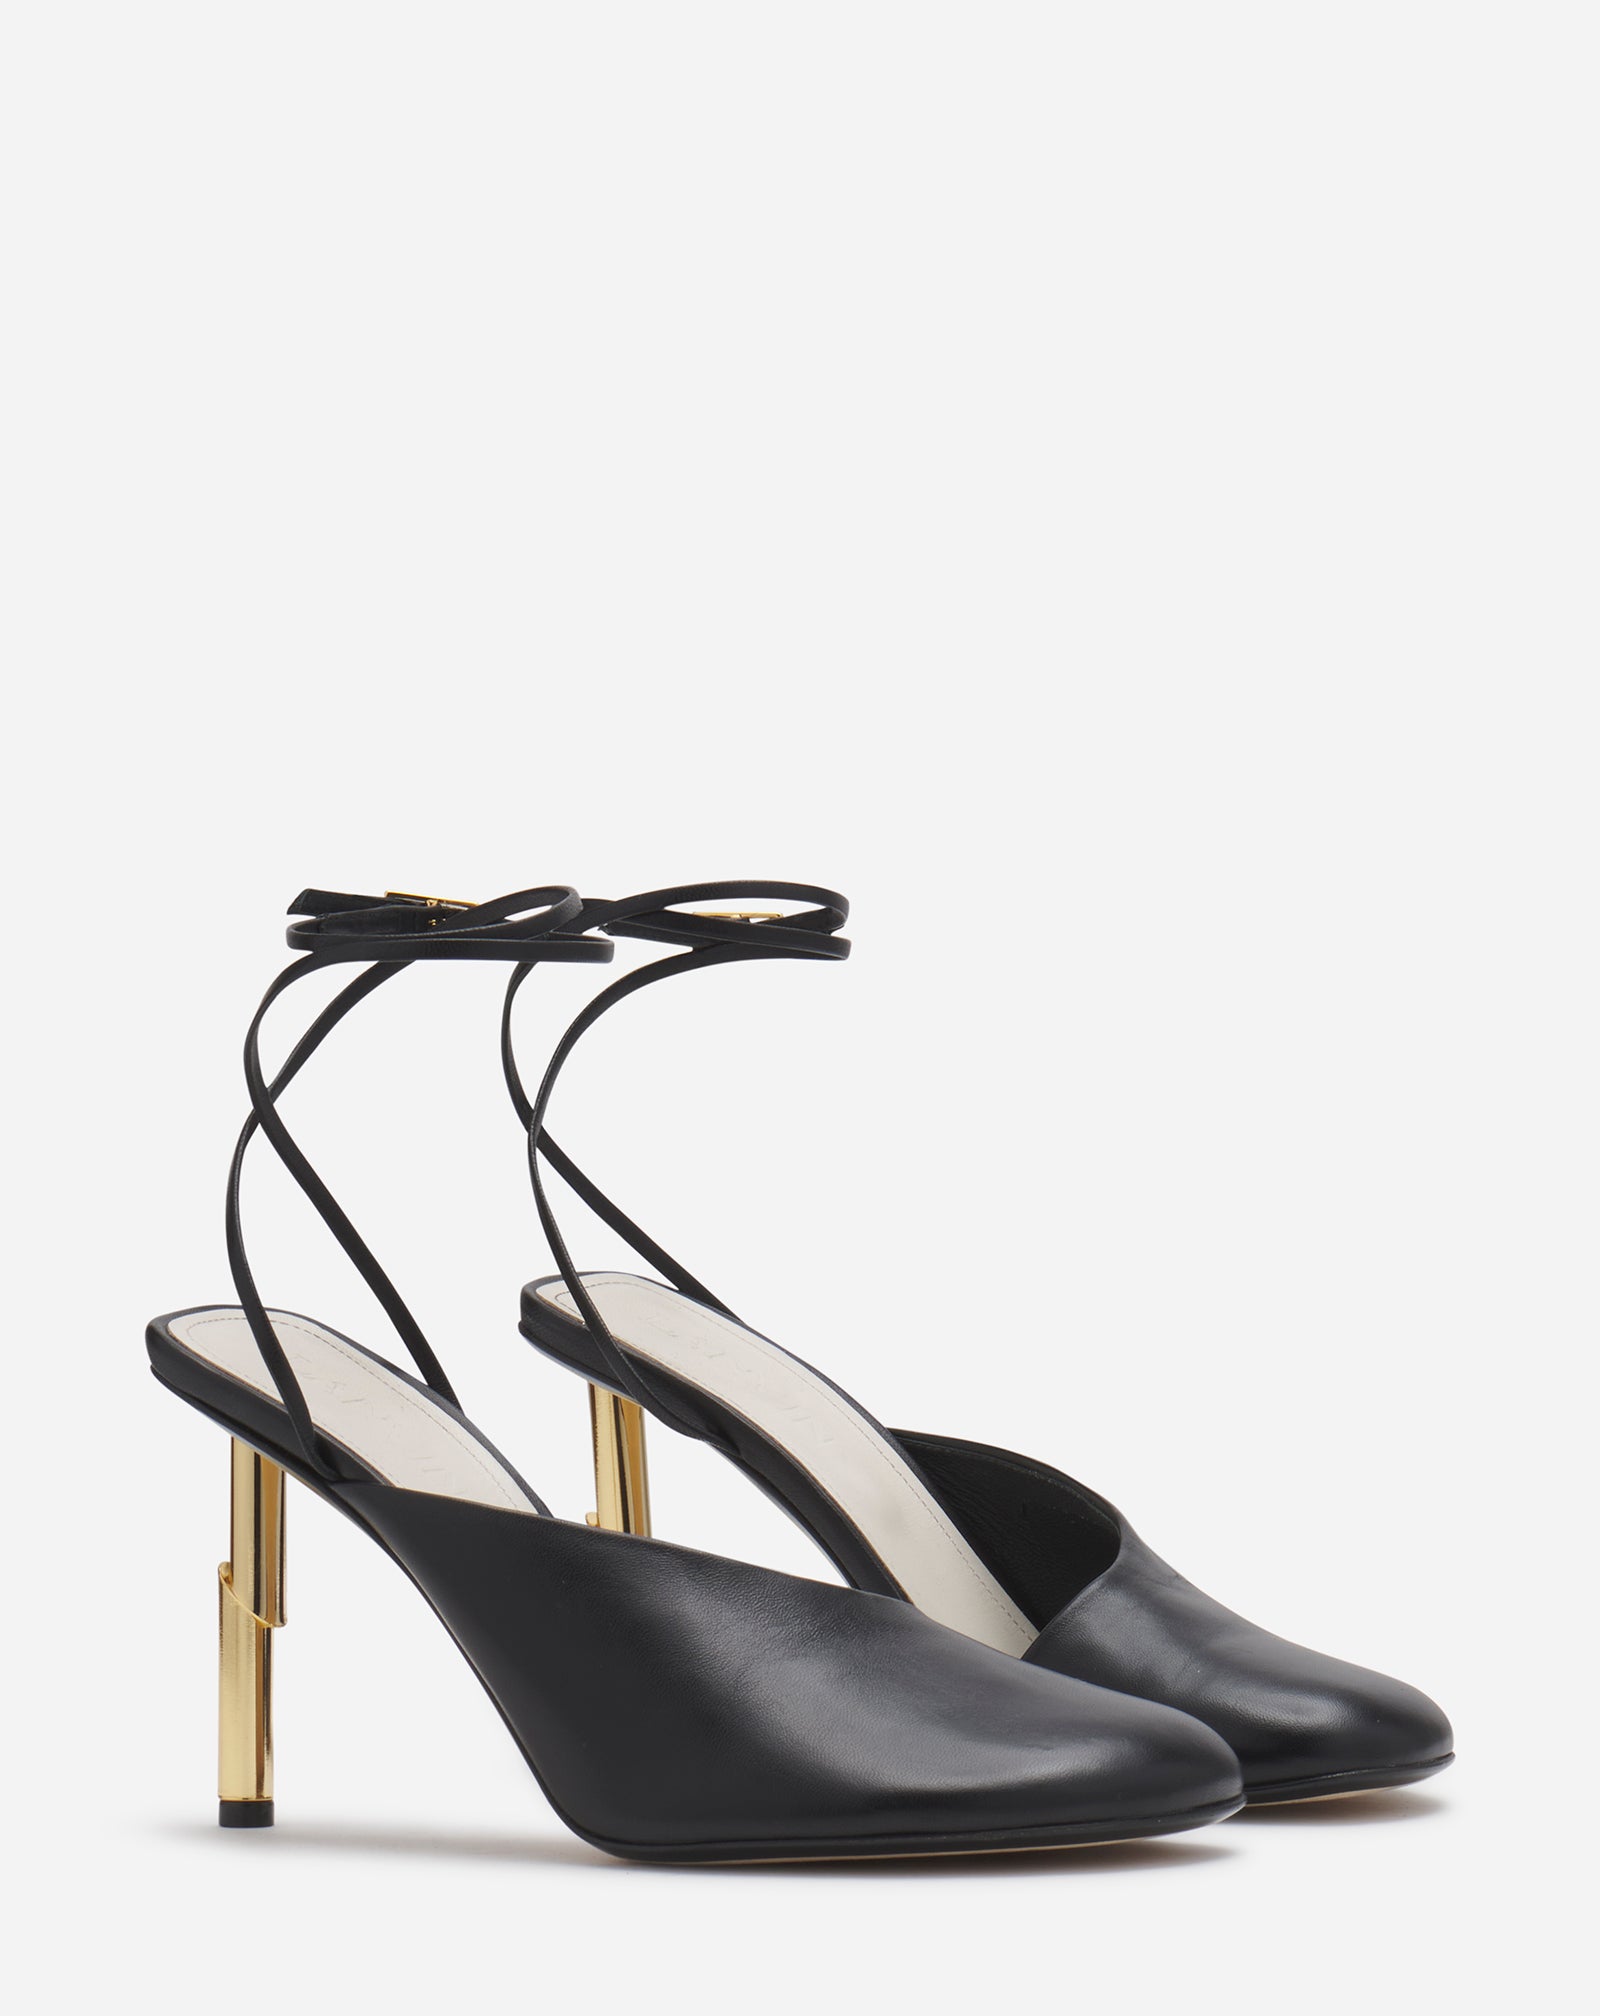 SEQUENCE BY LANVIN CLOSED SANDALS IN LEATHER, BLACK